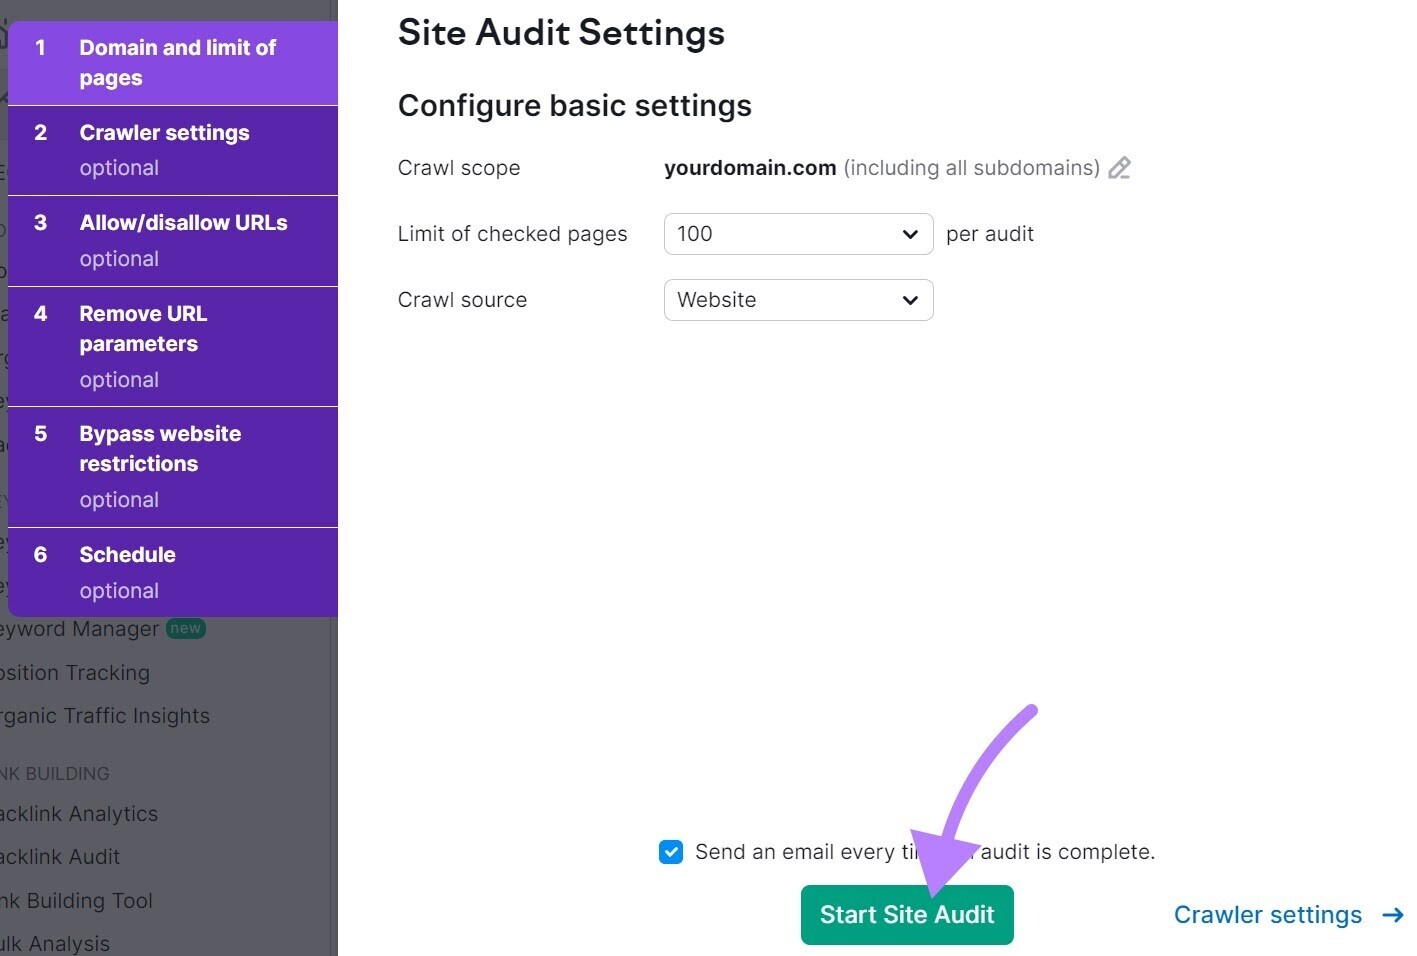 "Site Audit Settings" page